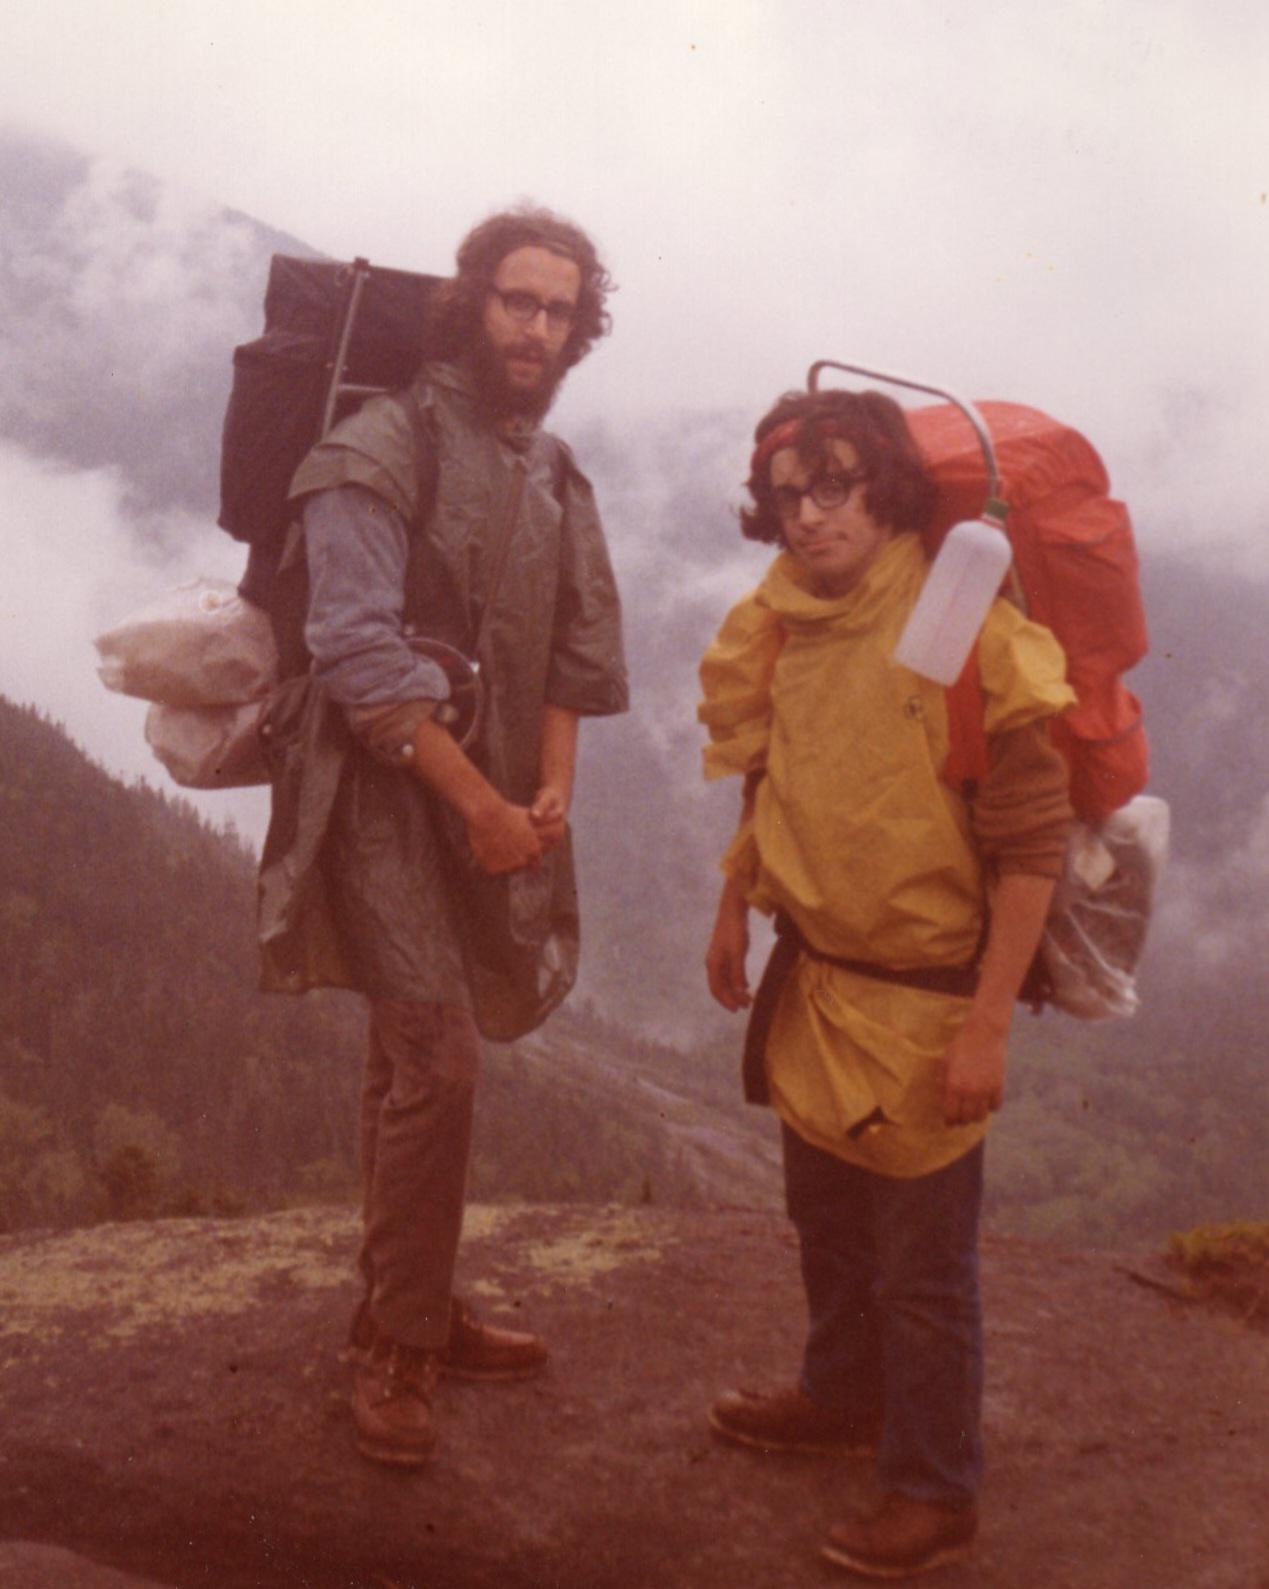 My dad (on the left) and a friend in the early 70's, on a camping trip where they would end up finding a dead body in the woods.jpg